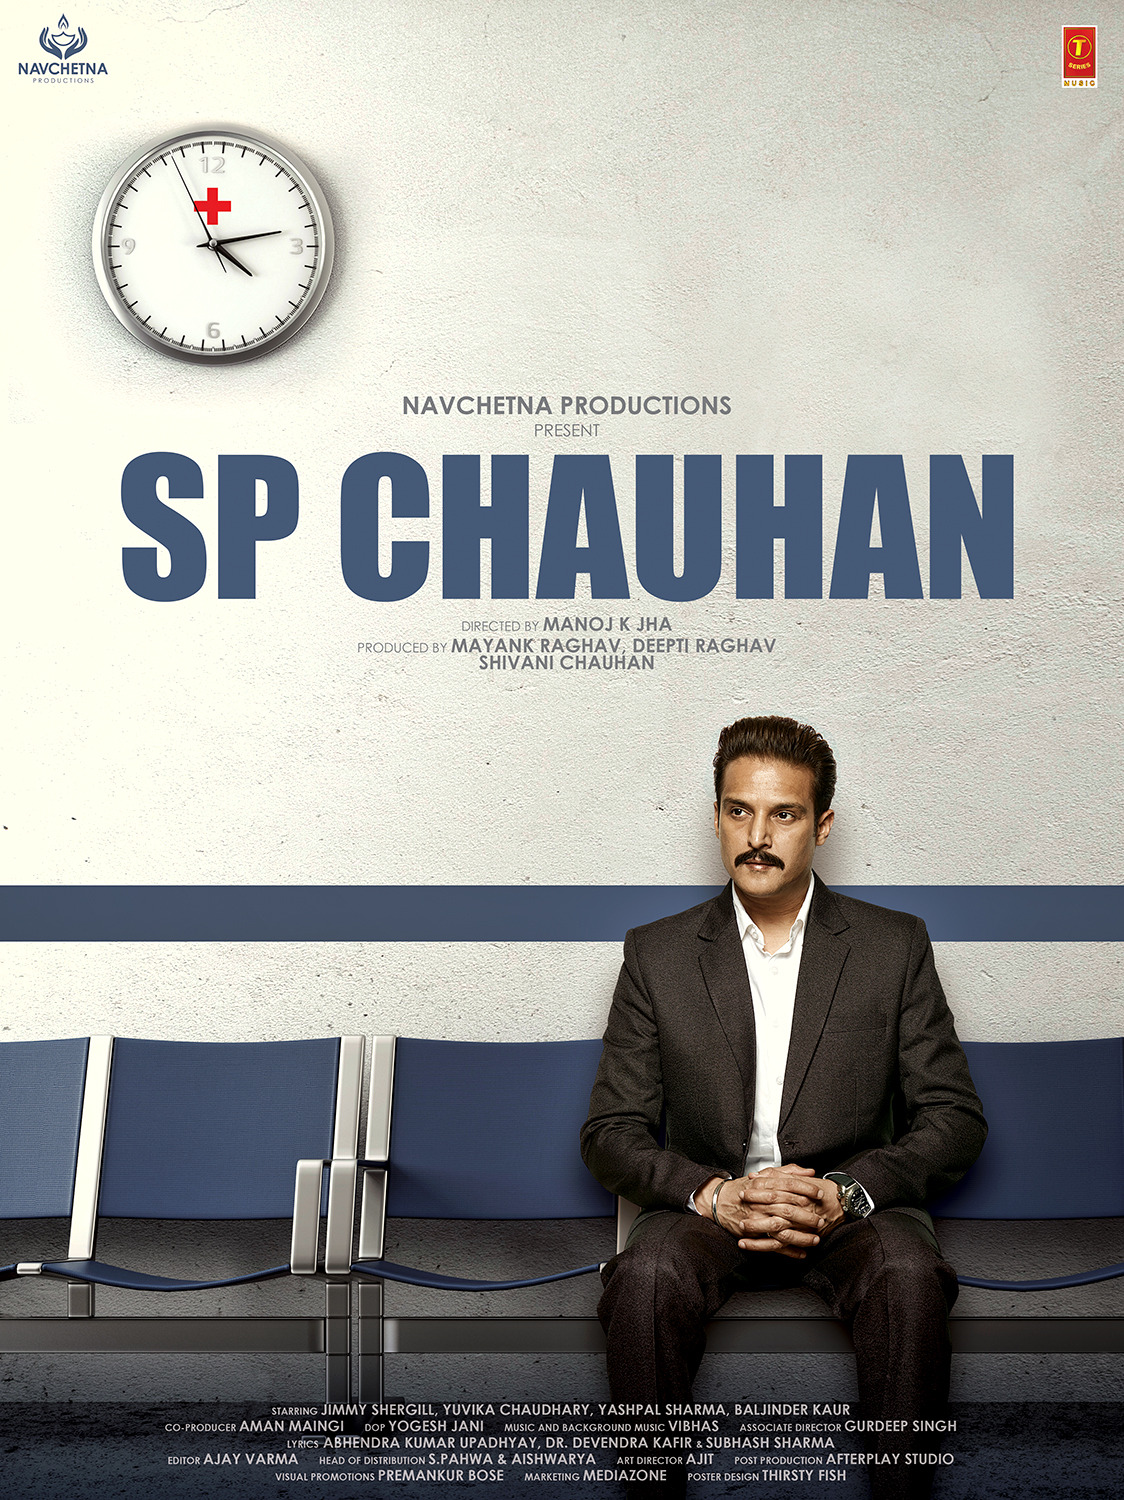 Extra Large Movie Poster Image for S.P. Chauhan (#2 of 3)